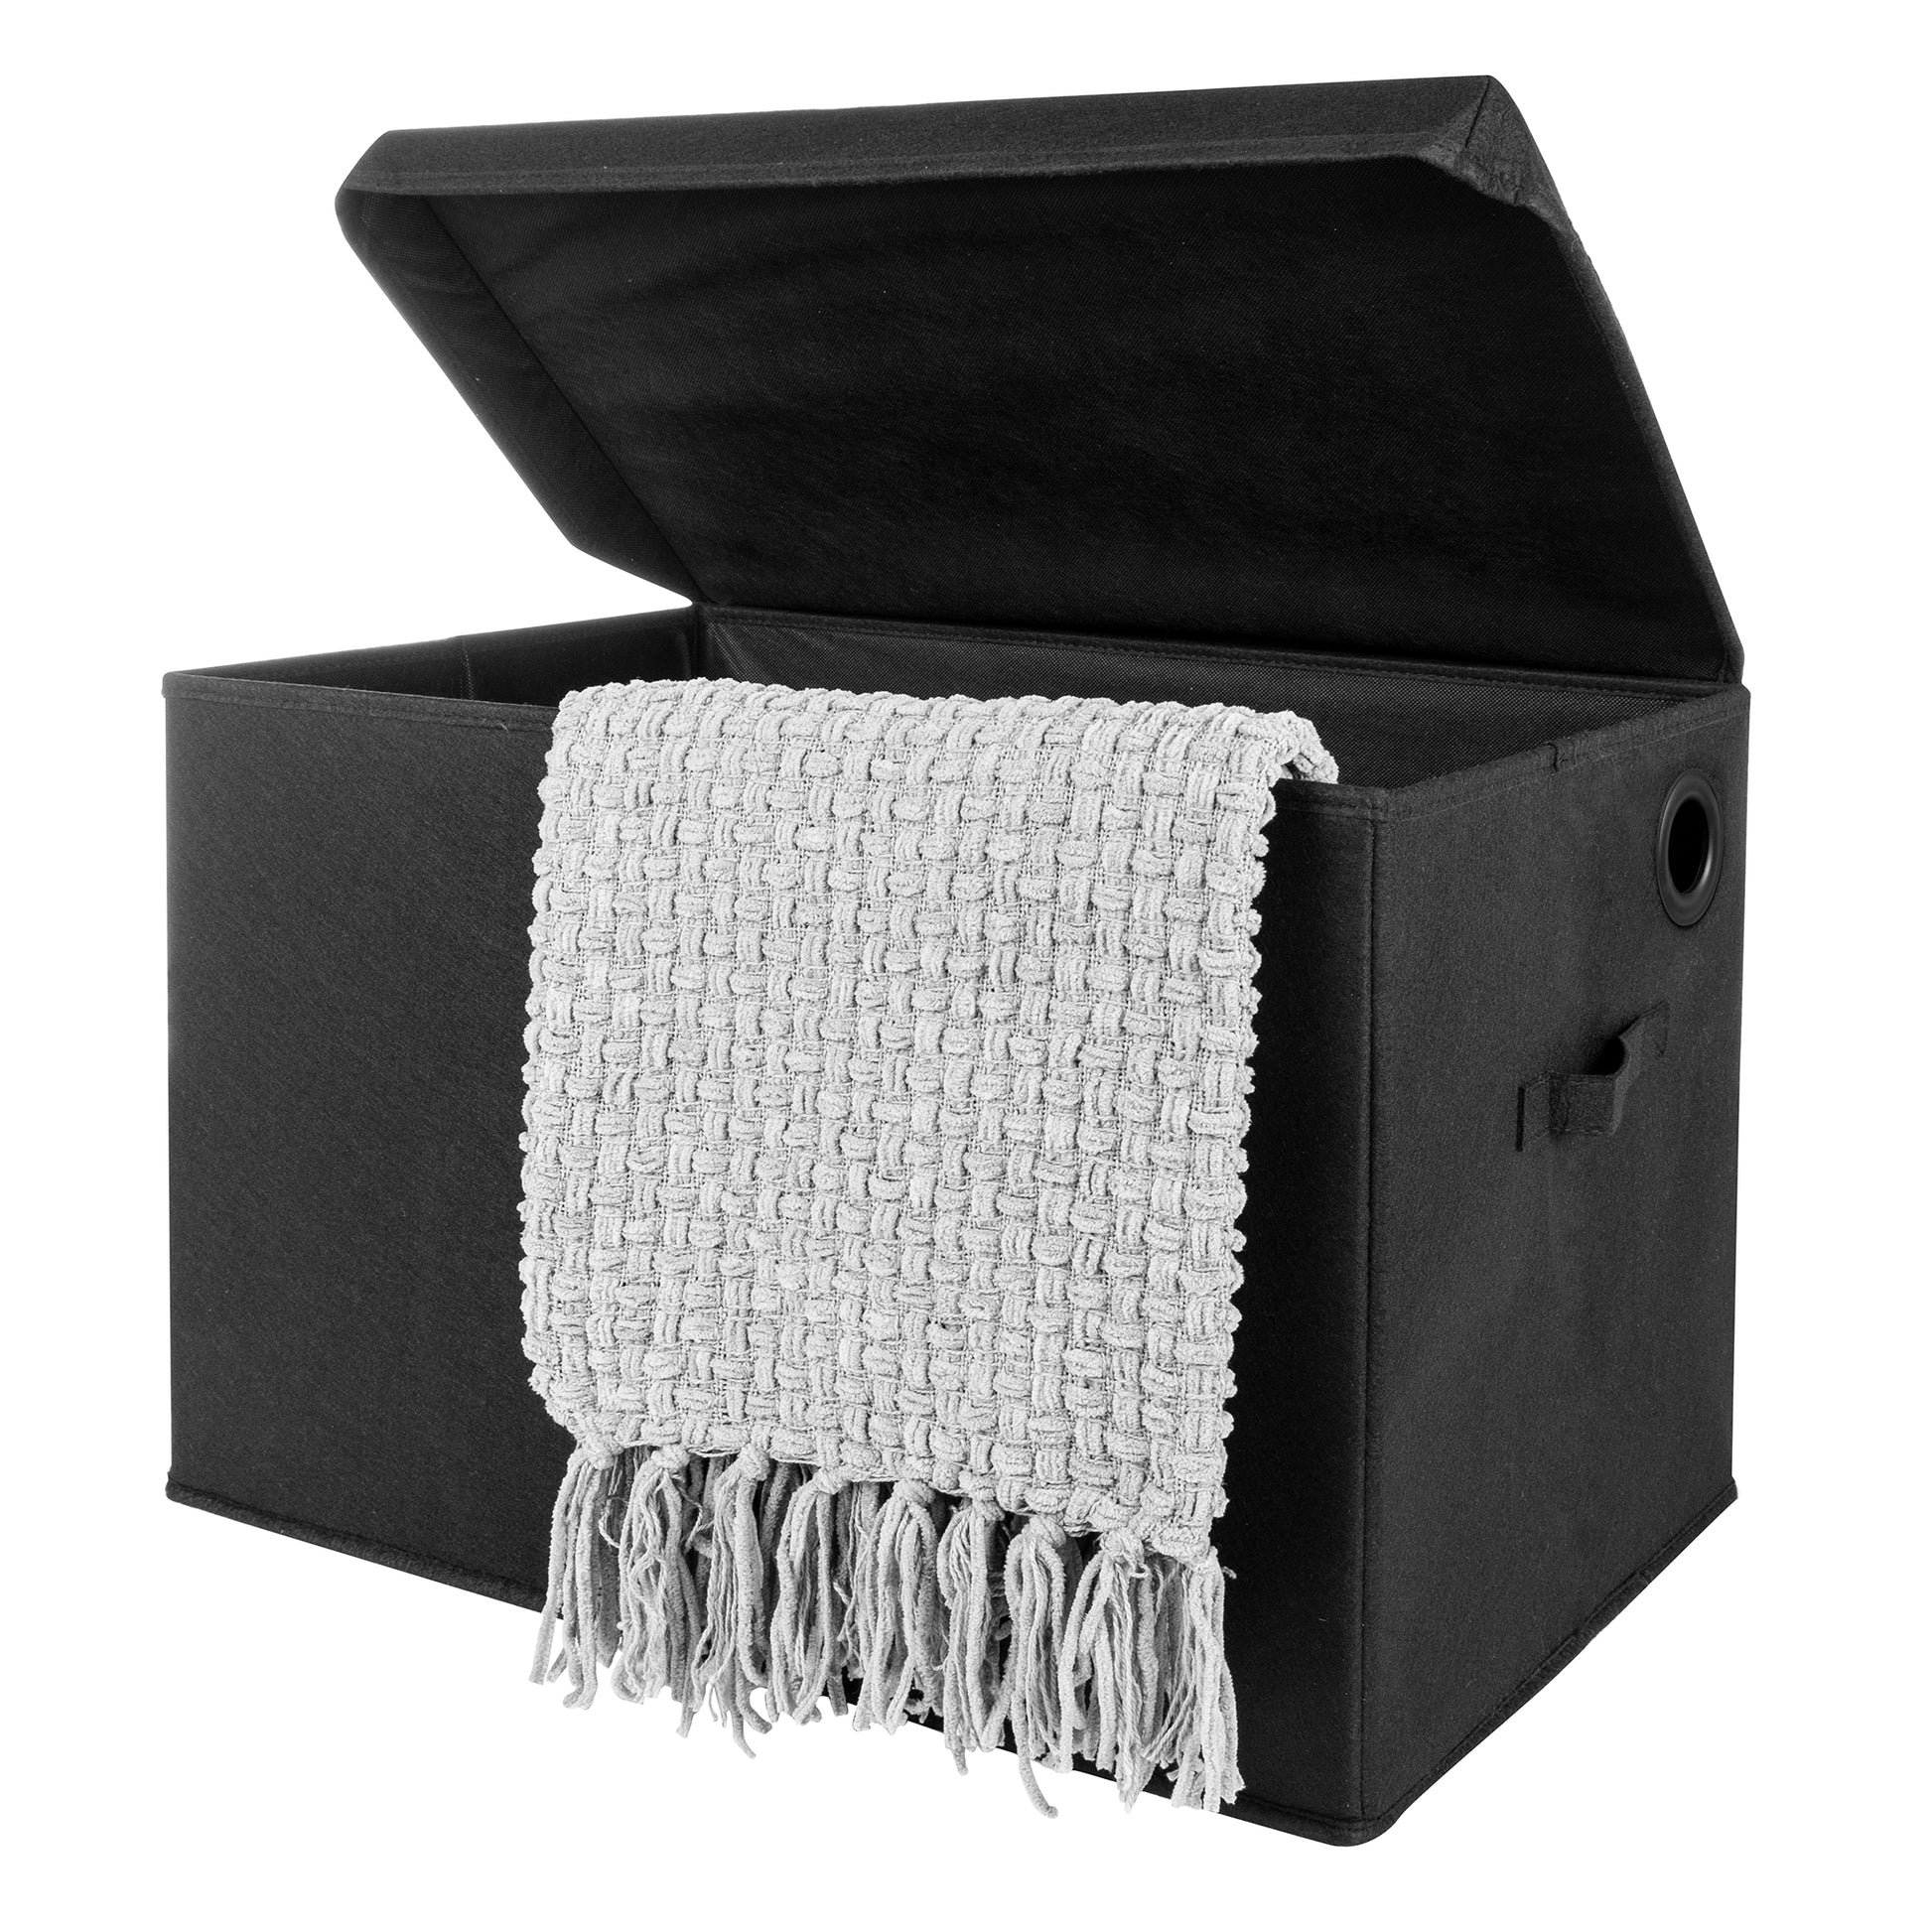 Black Felt Toy Box by Sammy & Lou® Angled with lid open with gray blanket peeking out